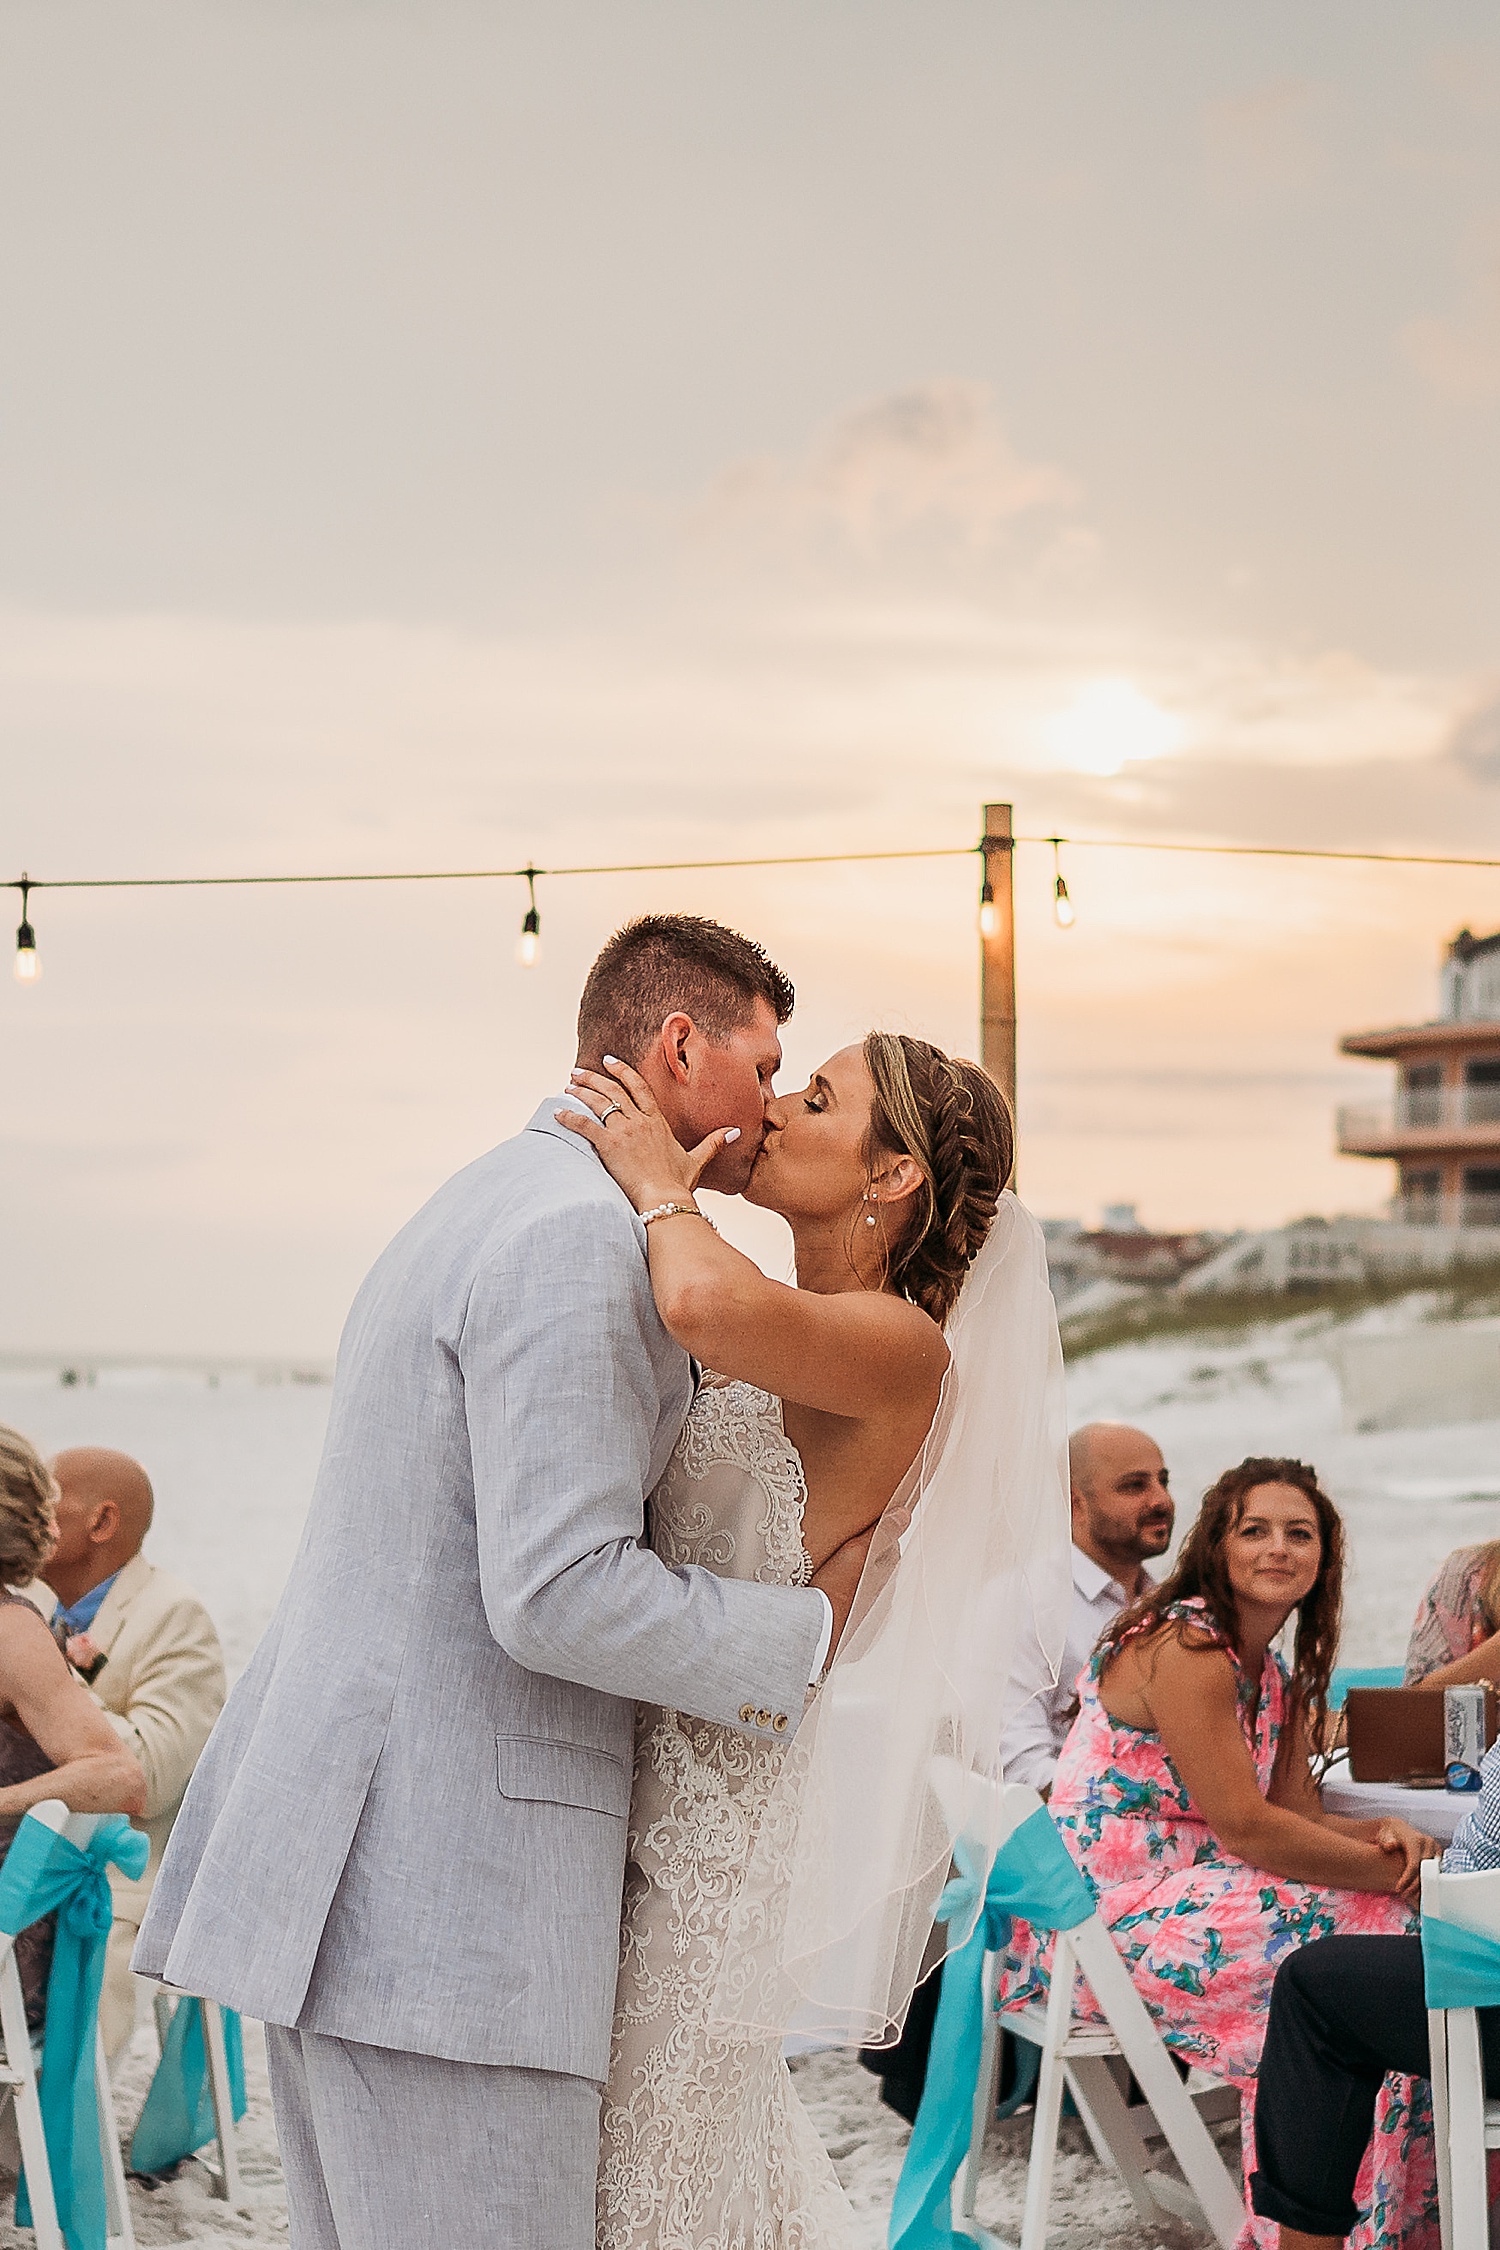 kissing at sunset in front of friends and family at wedding reception wearing veil in hair 